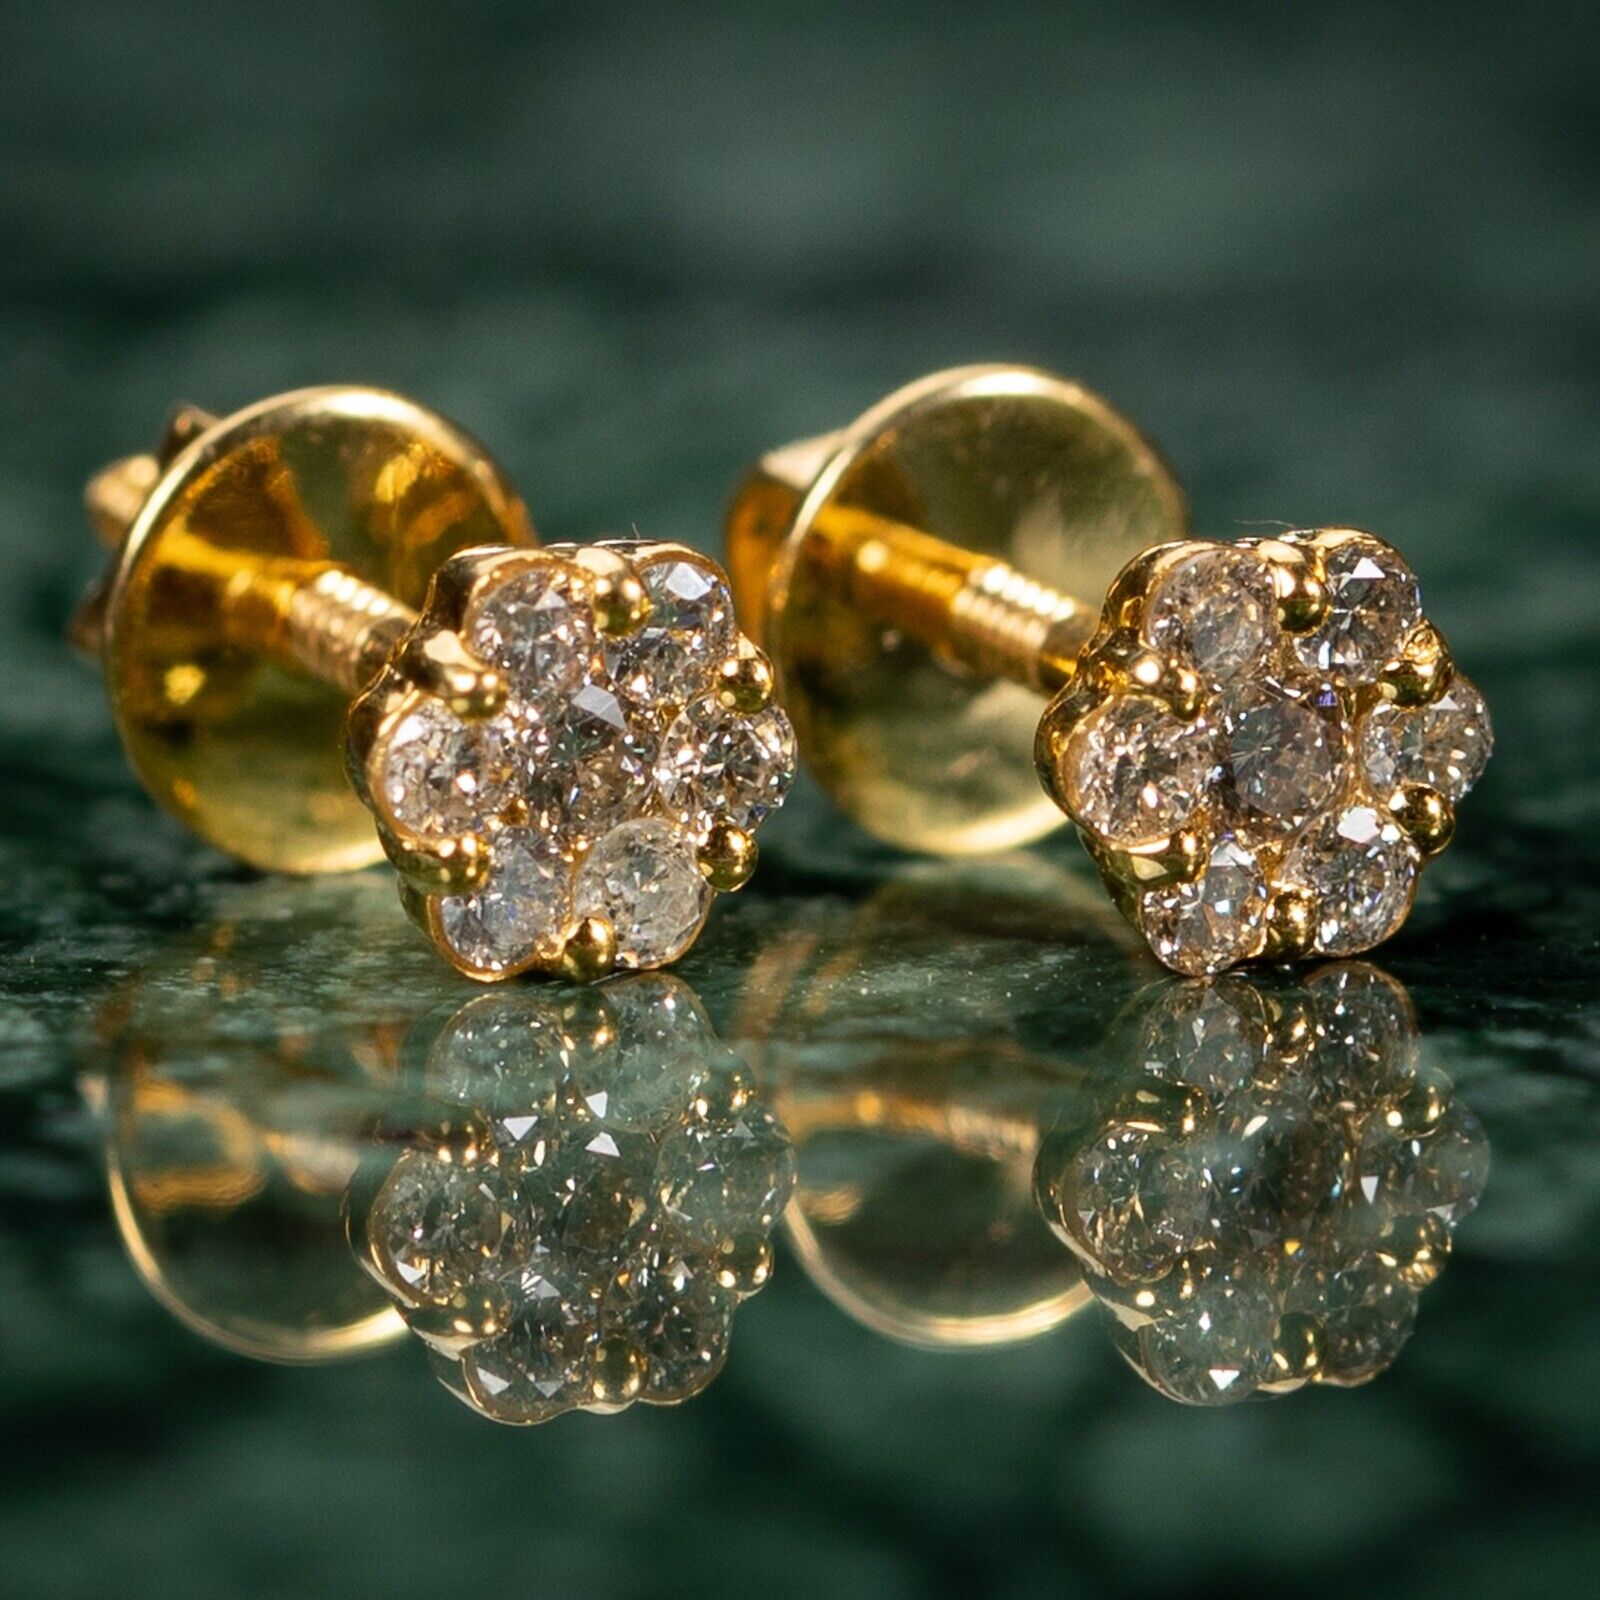 Unisex Solid 10k Yellow Gold 0.38Ct Natural Diamond Cluster Small Stud Earrings